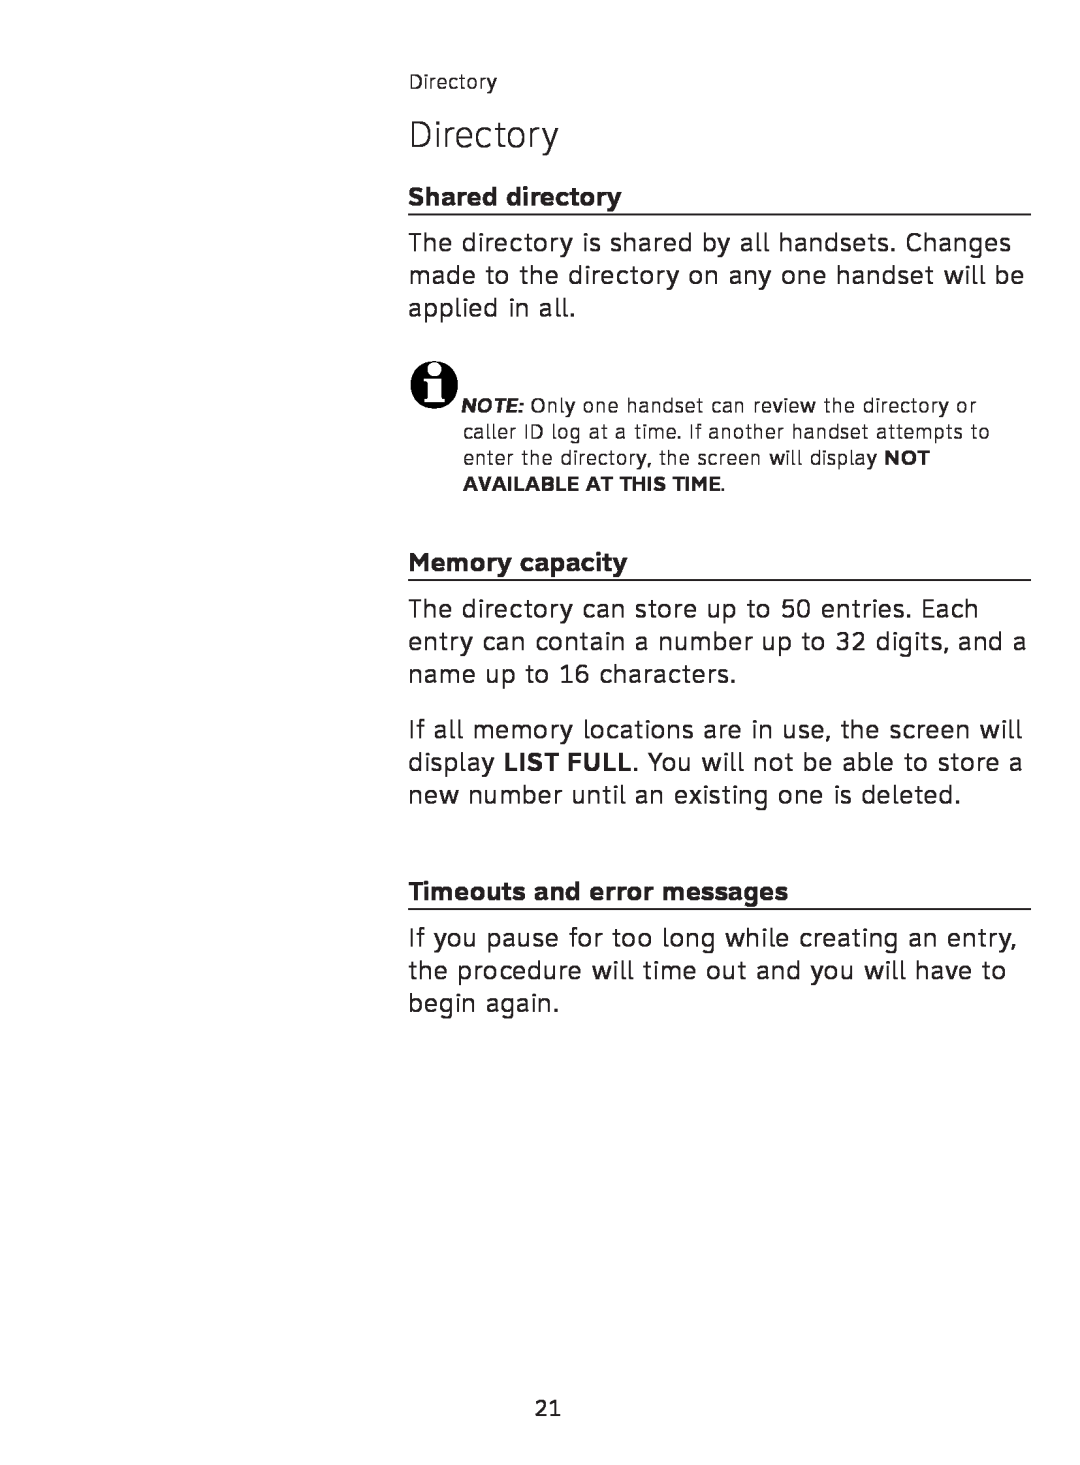 AT&T AT3111-2 user manual Directory, Shared directory, Memory capacity, Timeouts and error messages 